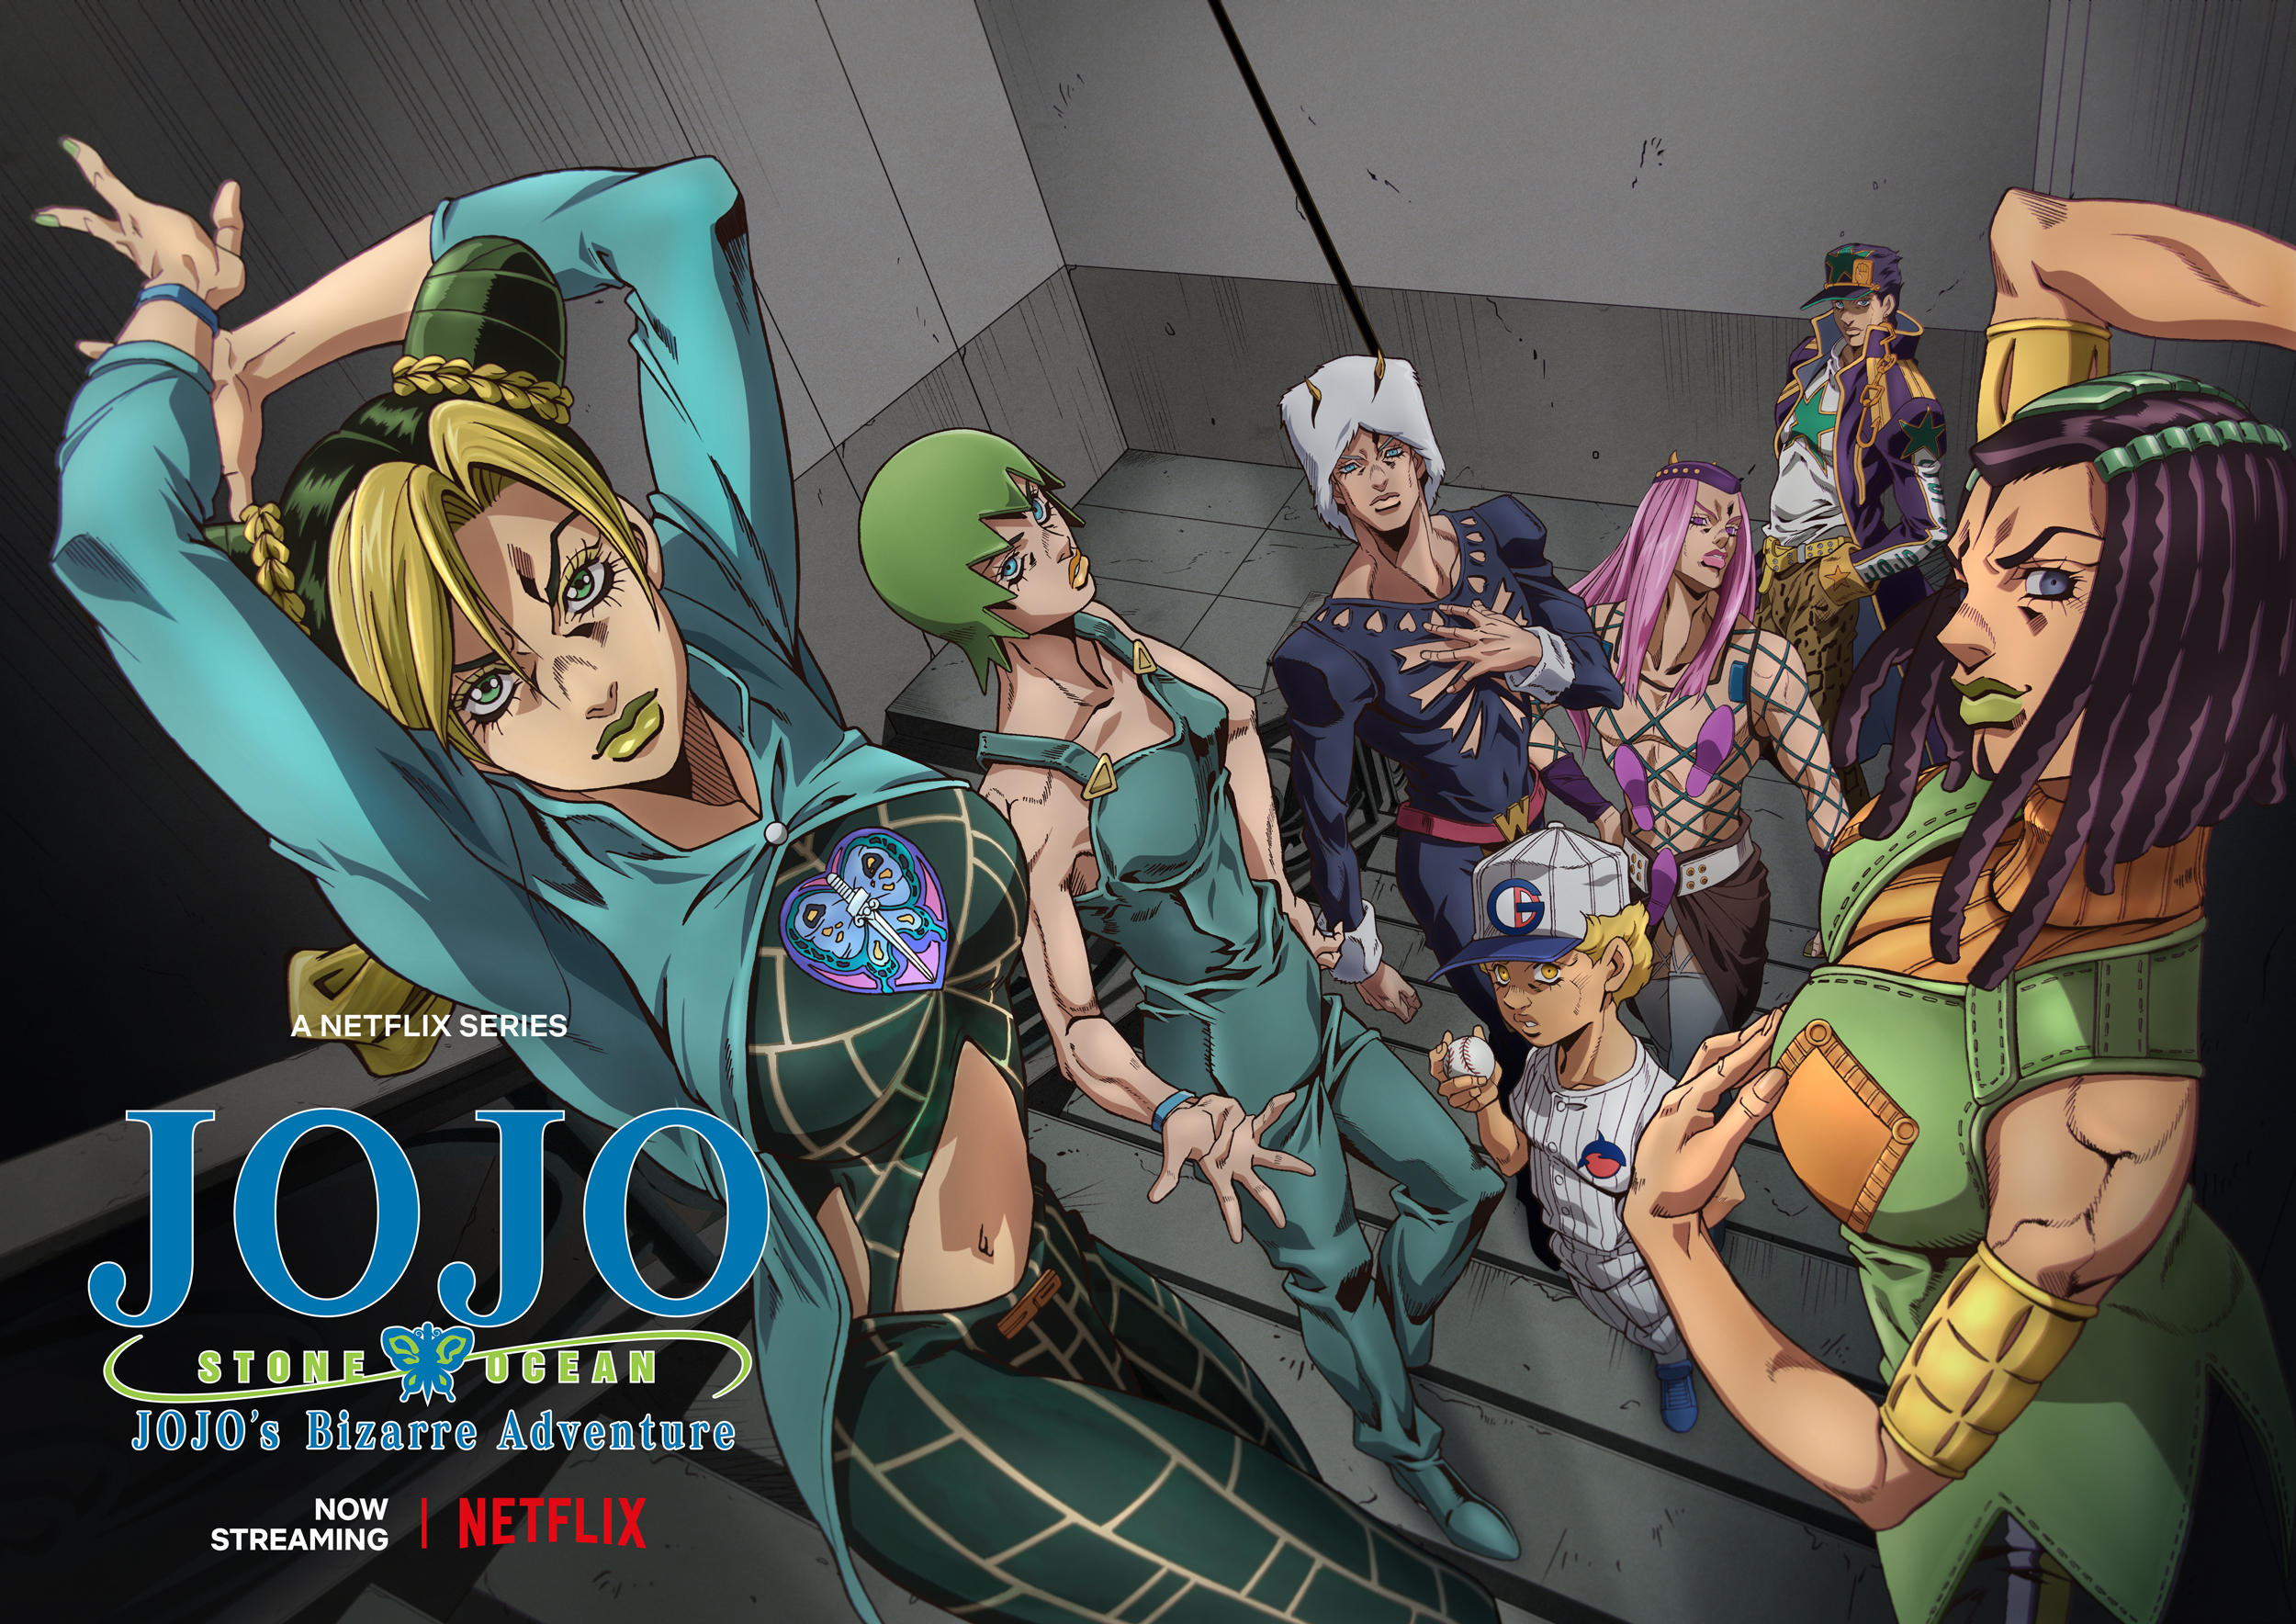 Key art for 'JoJo's Bizarre Adventure: Stone Ocean,' which could receive a Part 3 sometime in 2023. The image sees the main cast of the anime posing together with the logo placed in the bottom left corner.